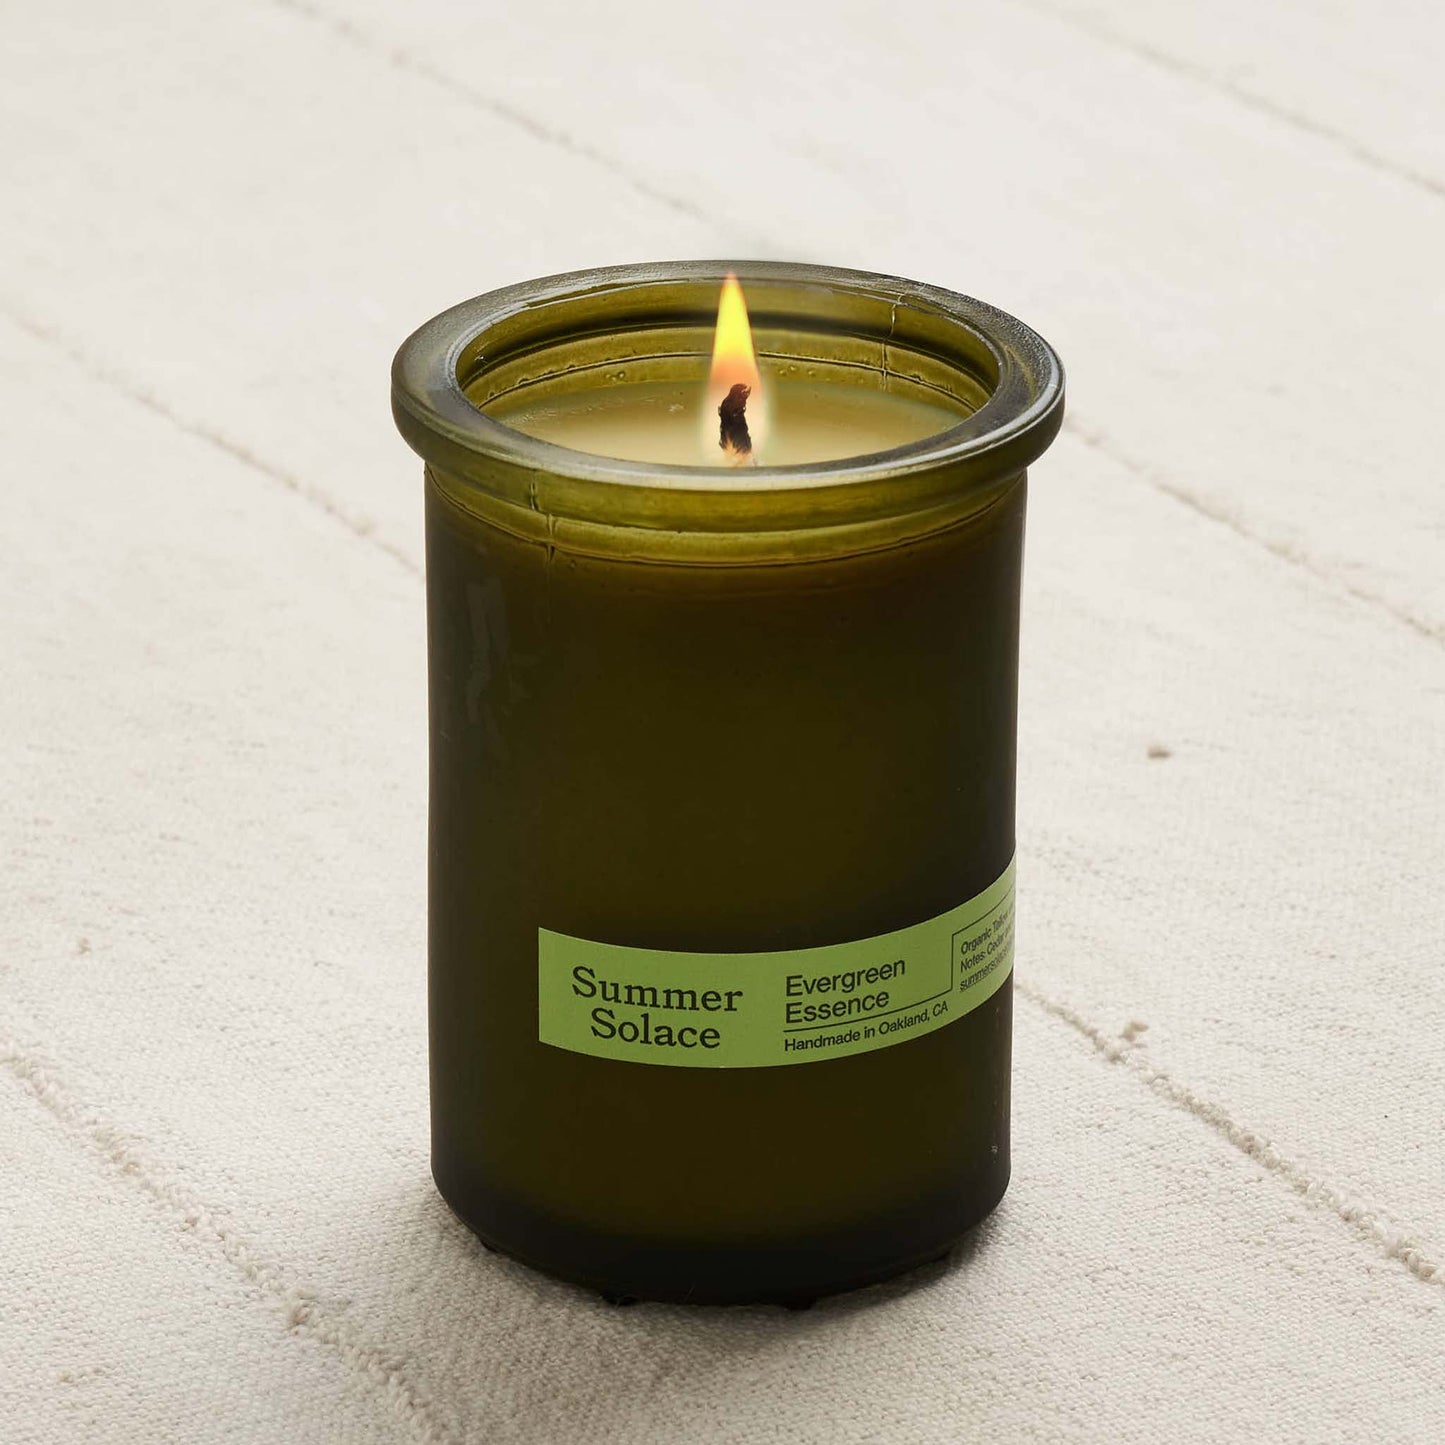 Evergreen Essence Tallow + Beeswax Candle